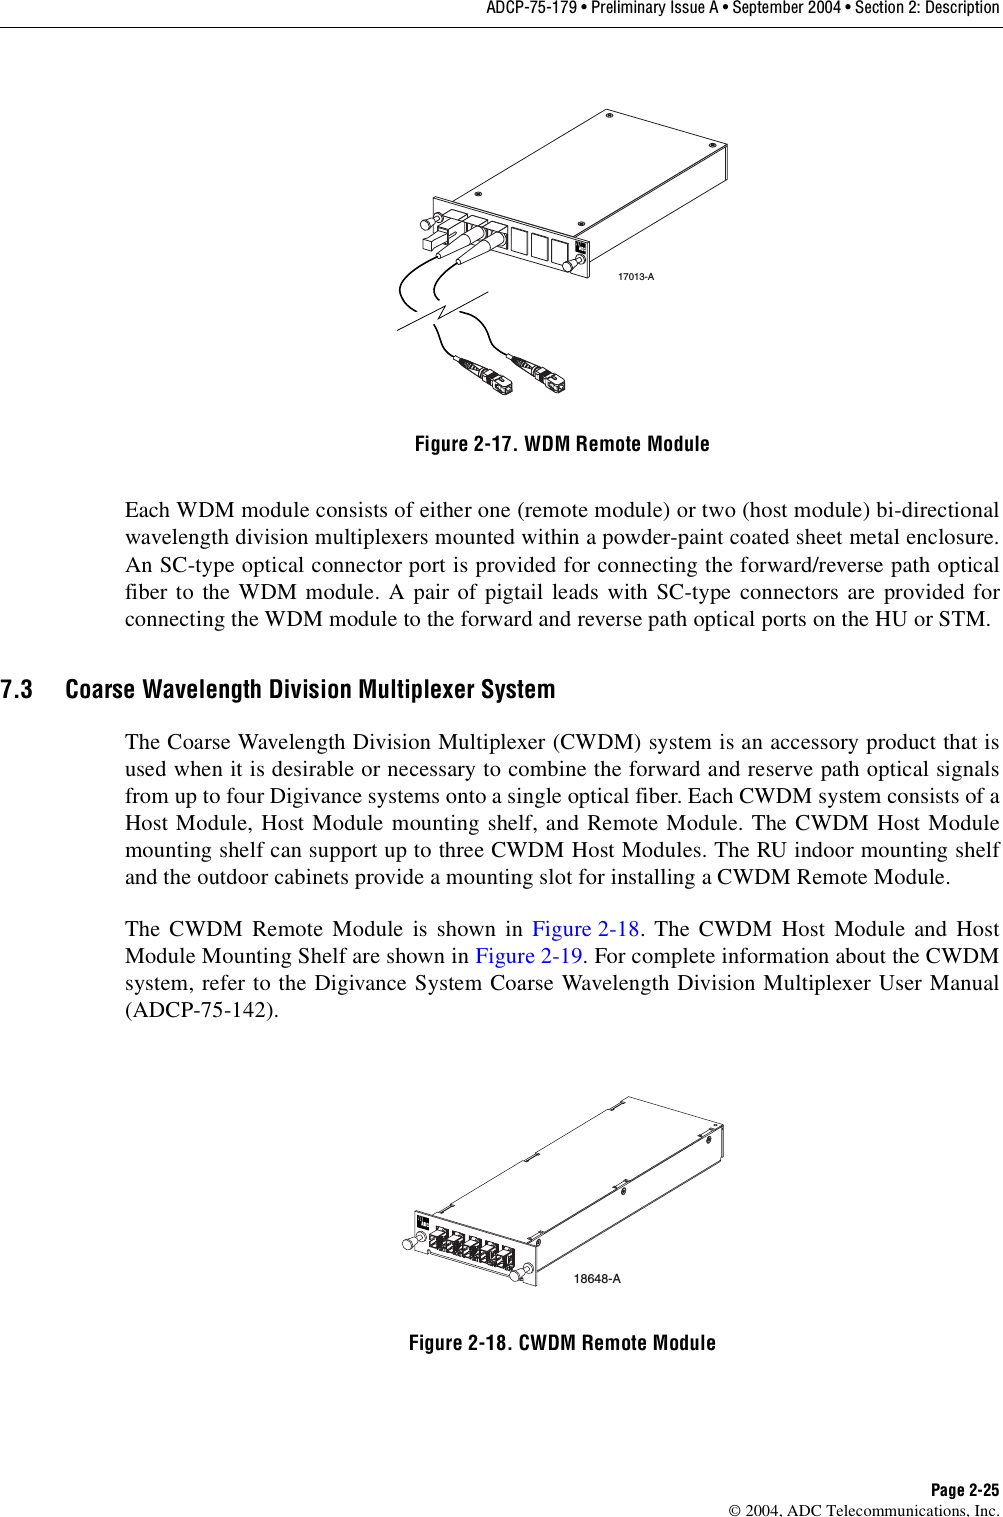 ADCP-75-179 • Preliminary Issue A • September 2004 • Section 2: DescriptionPage 2-25© 2004, ADC Telecommunications, Inc.Figure 2-17. WDM Remote ModuleEach WDM module consists of either one (remote module) or two (host module) bi-directionalwavelength division multiplexers mounted within a powder-paint coated sheet metal enclosure.An SC-type optical connector port is provided for connecting the forward/reverse path opticalfiber to the WDM module. A pair of pigtail leads with SC-type connectors are provided forconnecting the WDM module to the forward and reverse path optical ports on the HU or STM. 7.3 Coarse Wavelength Division Multiplexer SystemThe Coarse Wavelength Division Multiplexer (CWDM) system is an accessory product that isused when it is desirable or necessary to combine the forward and reserve path optical signalsfrom up to four Digivance systems onto a single optical fiber. Each CWDM system consists of aHost Module, Host Module mounting shelf, and Remote Module. The CWDM Host Modulemounting shelf can support up to three CWDM Host Modules. The RU indoor mounting shelfand the outdoor cabinets provide a mounting slot for installing a CWDM Remote Module. The CWDM Remote Module is shown in Figure 2-18. The CWDM Host Module and HostModule Mounting Shelf are shown in Figure 2-19. For complete information about the CWDMsystem, refer to the Digivance System Coarse Wavelength Division Multiplexer User Manual(ADCP-75-142).Figure 2-18. CWDM Remote Module17013-A18648-A